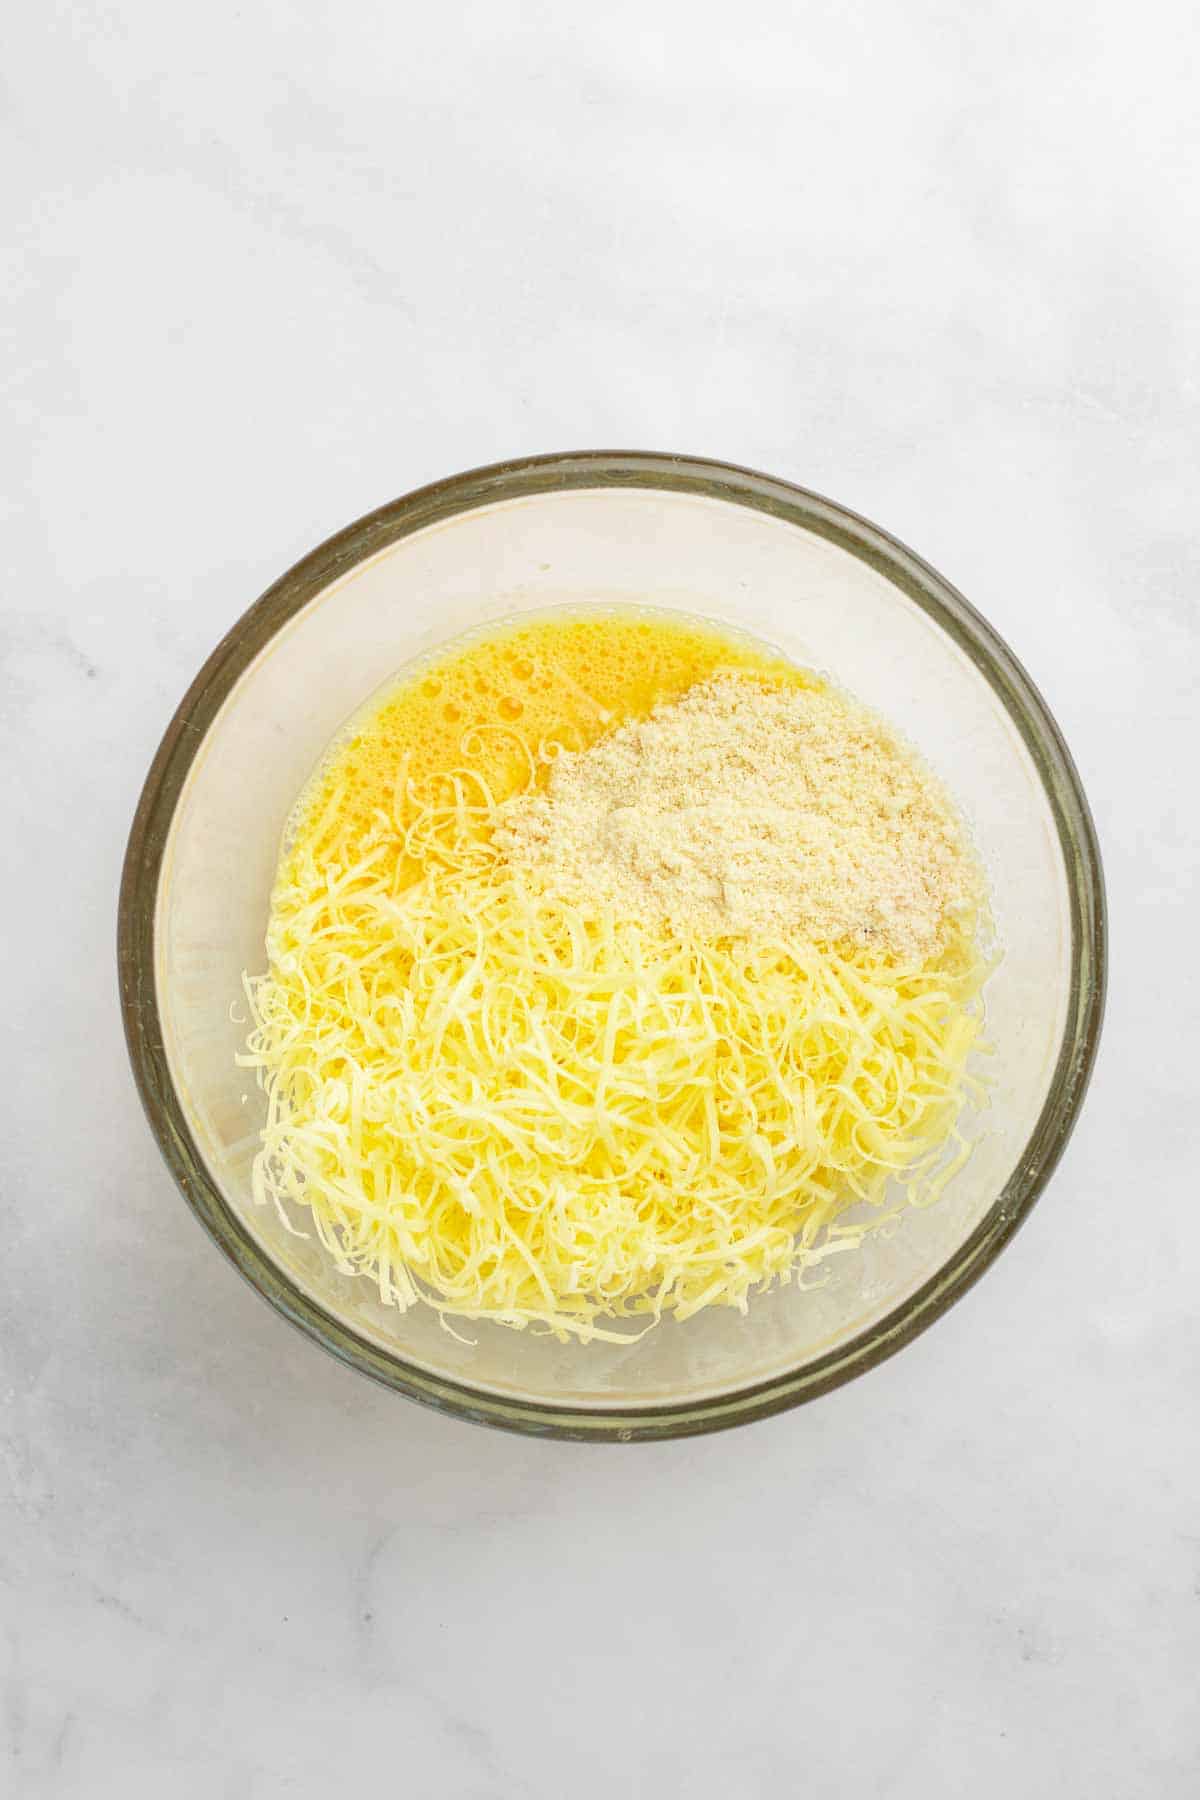 Eggs, cheese, and almond flour mixed together in a glass bowl